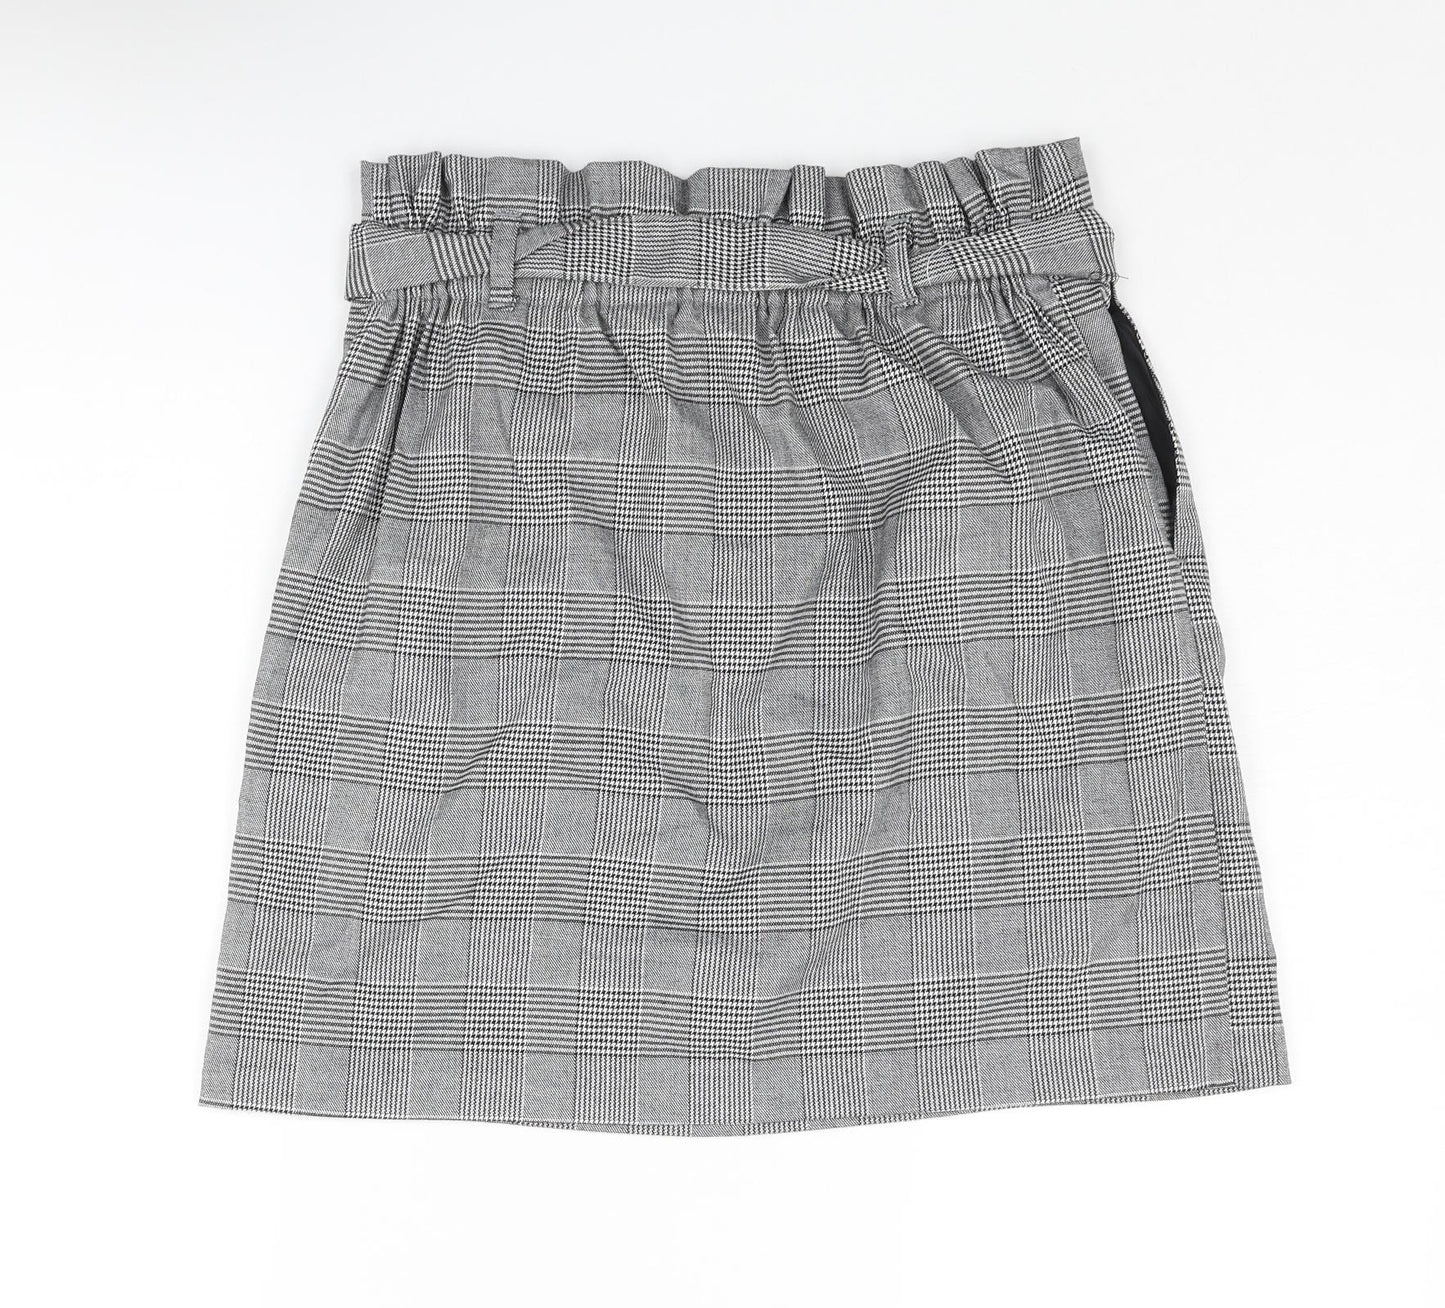 New Look Womens Grey Plaid Polyester A-Line Skirt Size 12